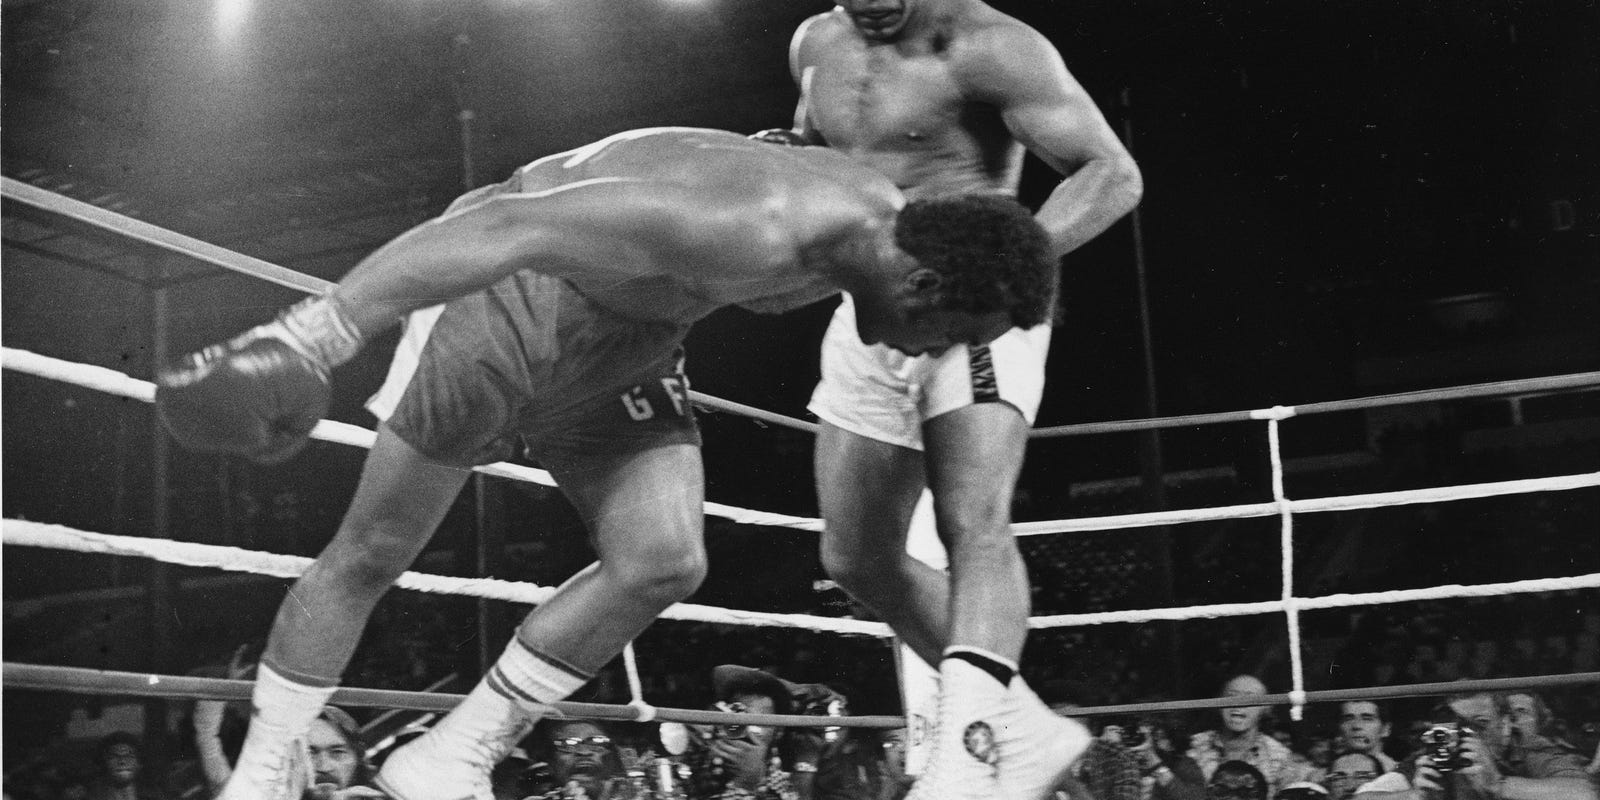 Top 10 heavyweight boxers of all time, as picked by Matthew Aguilar